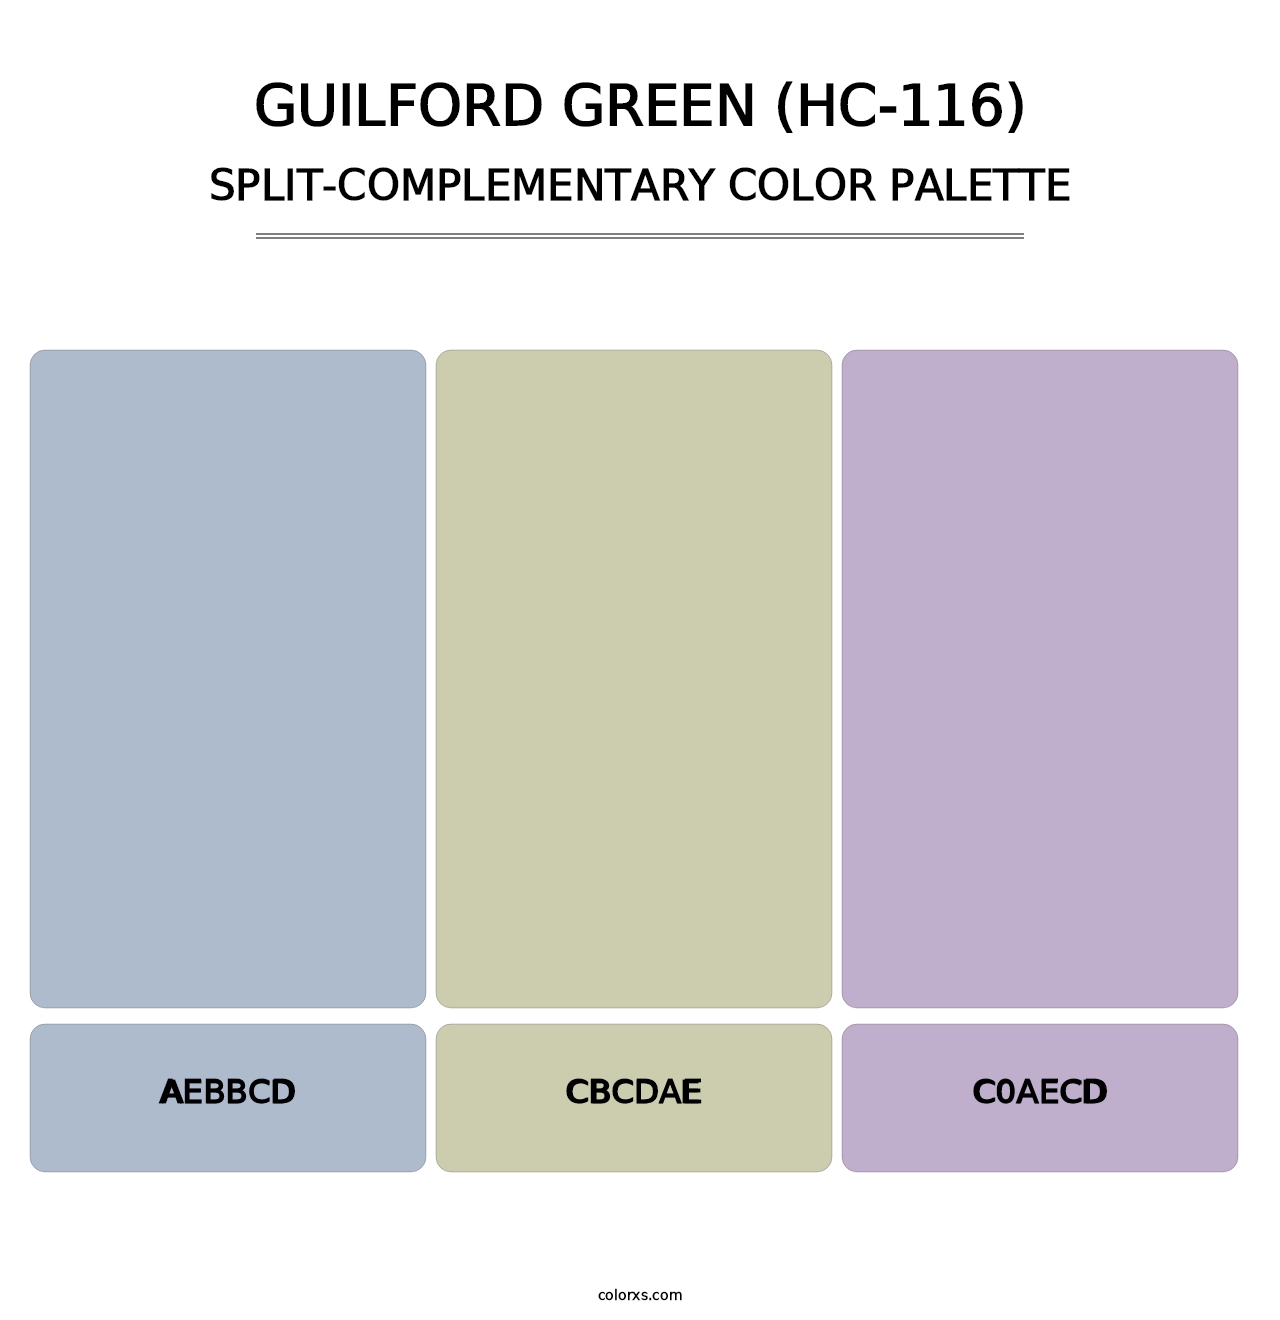 Guilford Green (HC-116) - Split-Complementary Color Palette